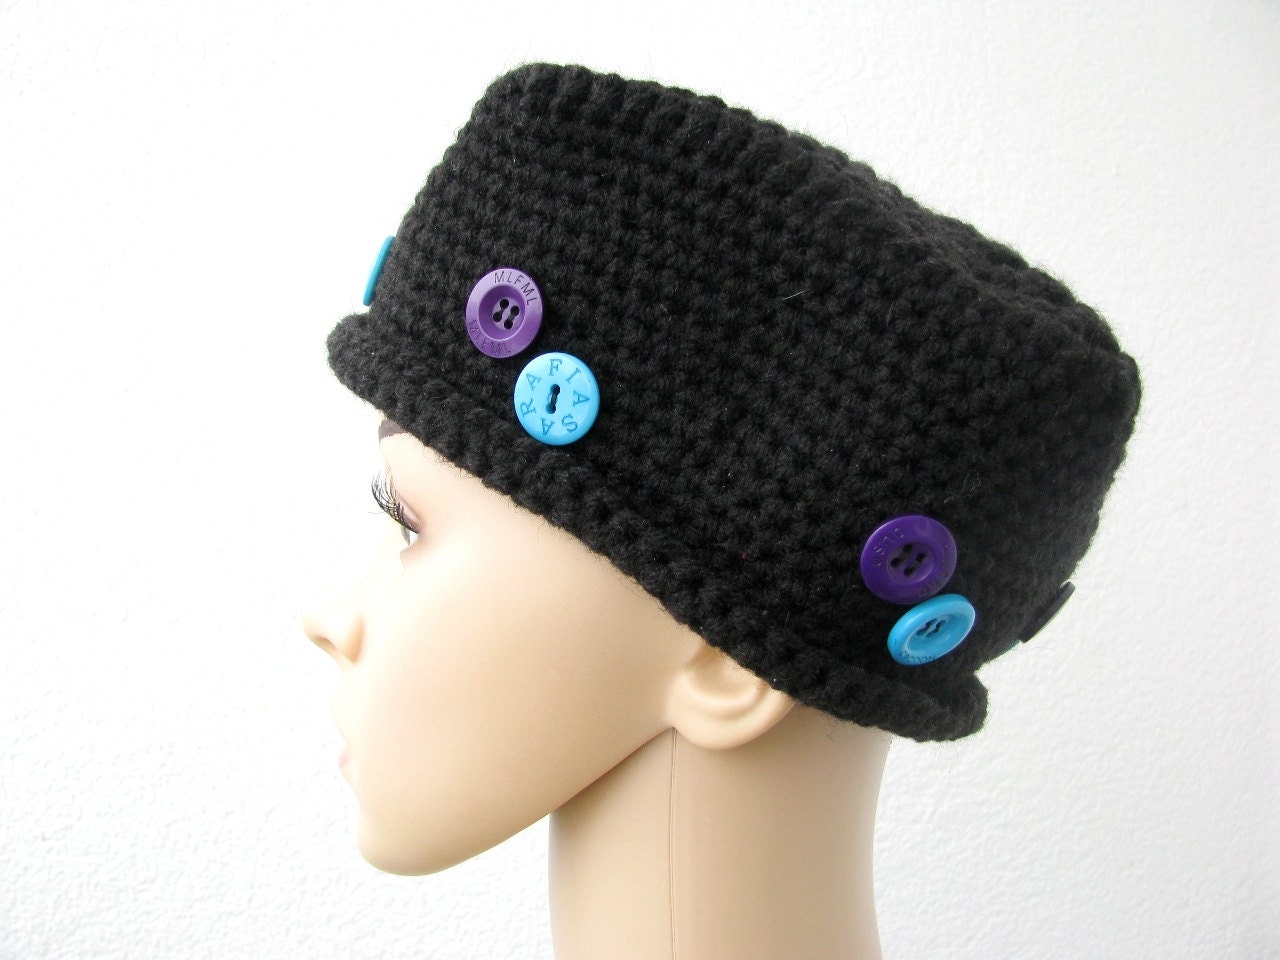 black crochet wool pillbox hat with purple turquoise buttons, stiff hat, cap, toque, small rolled brim - delectare